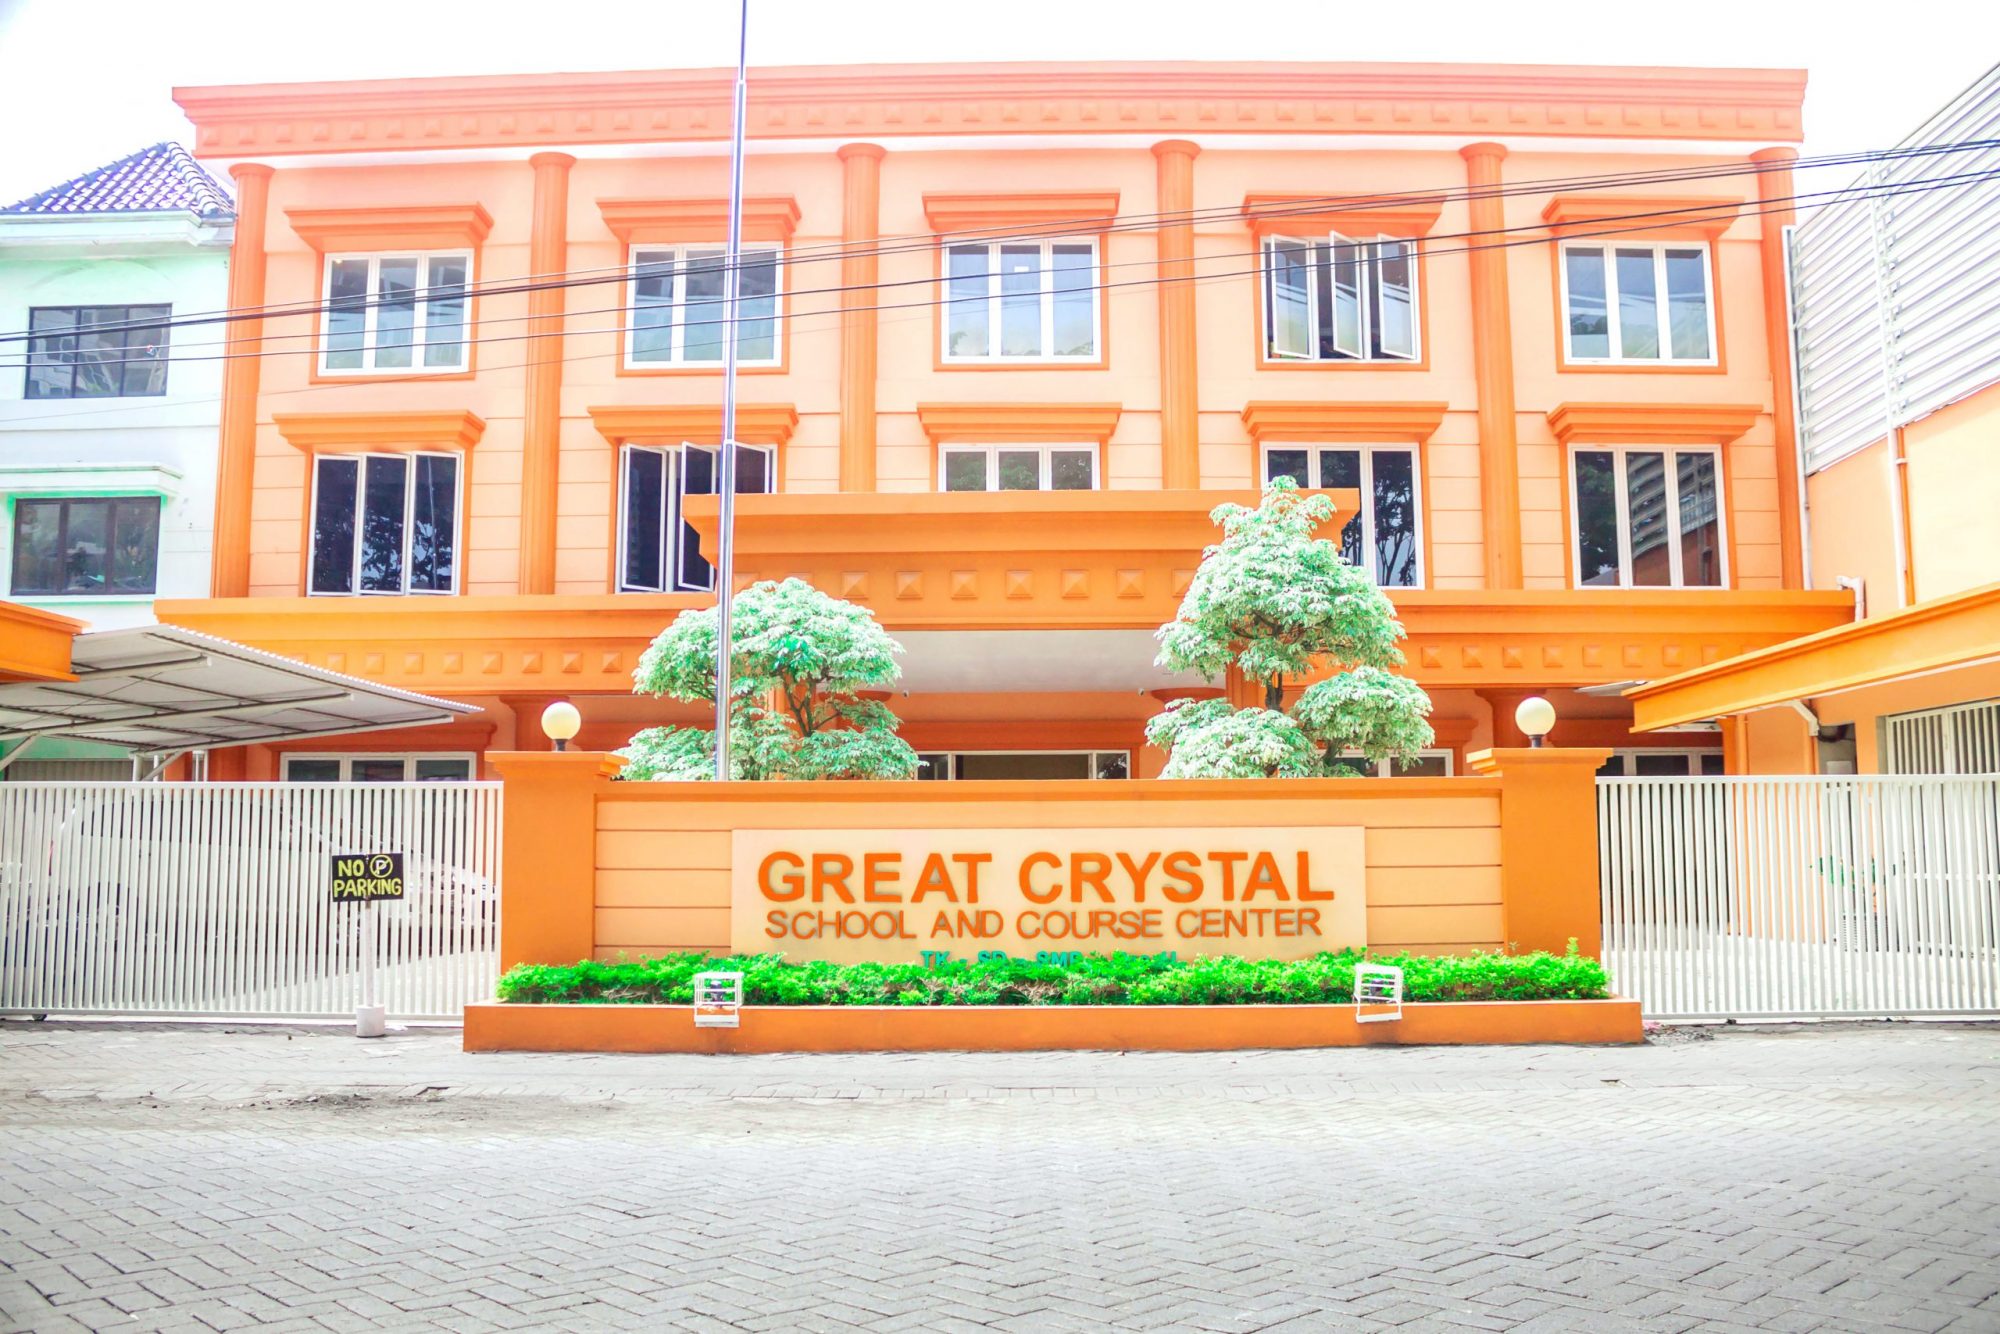 Great Crystal School and Course Center